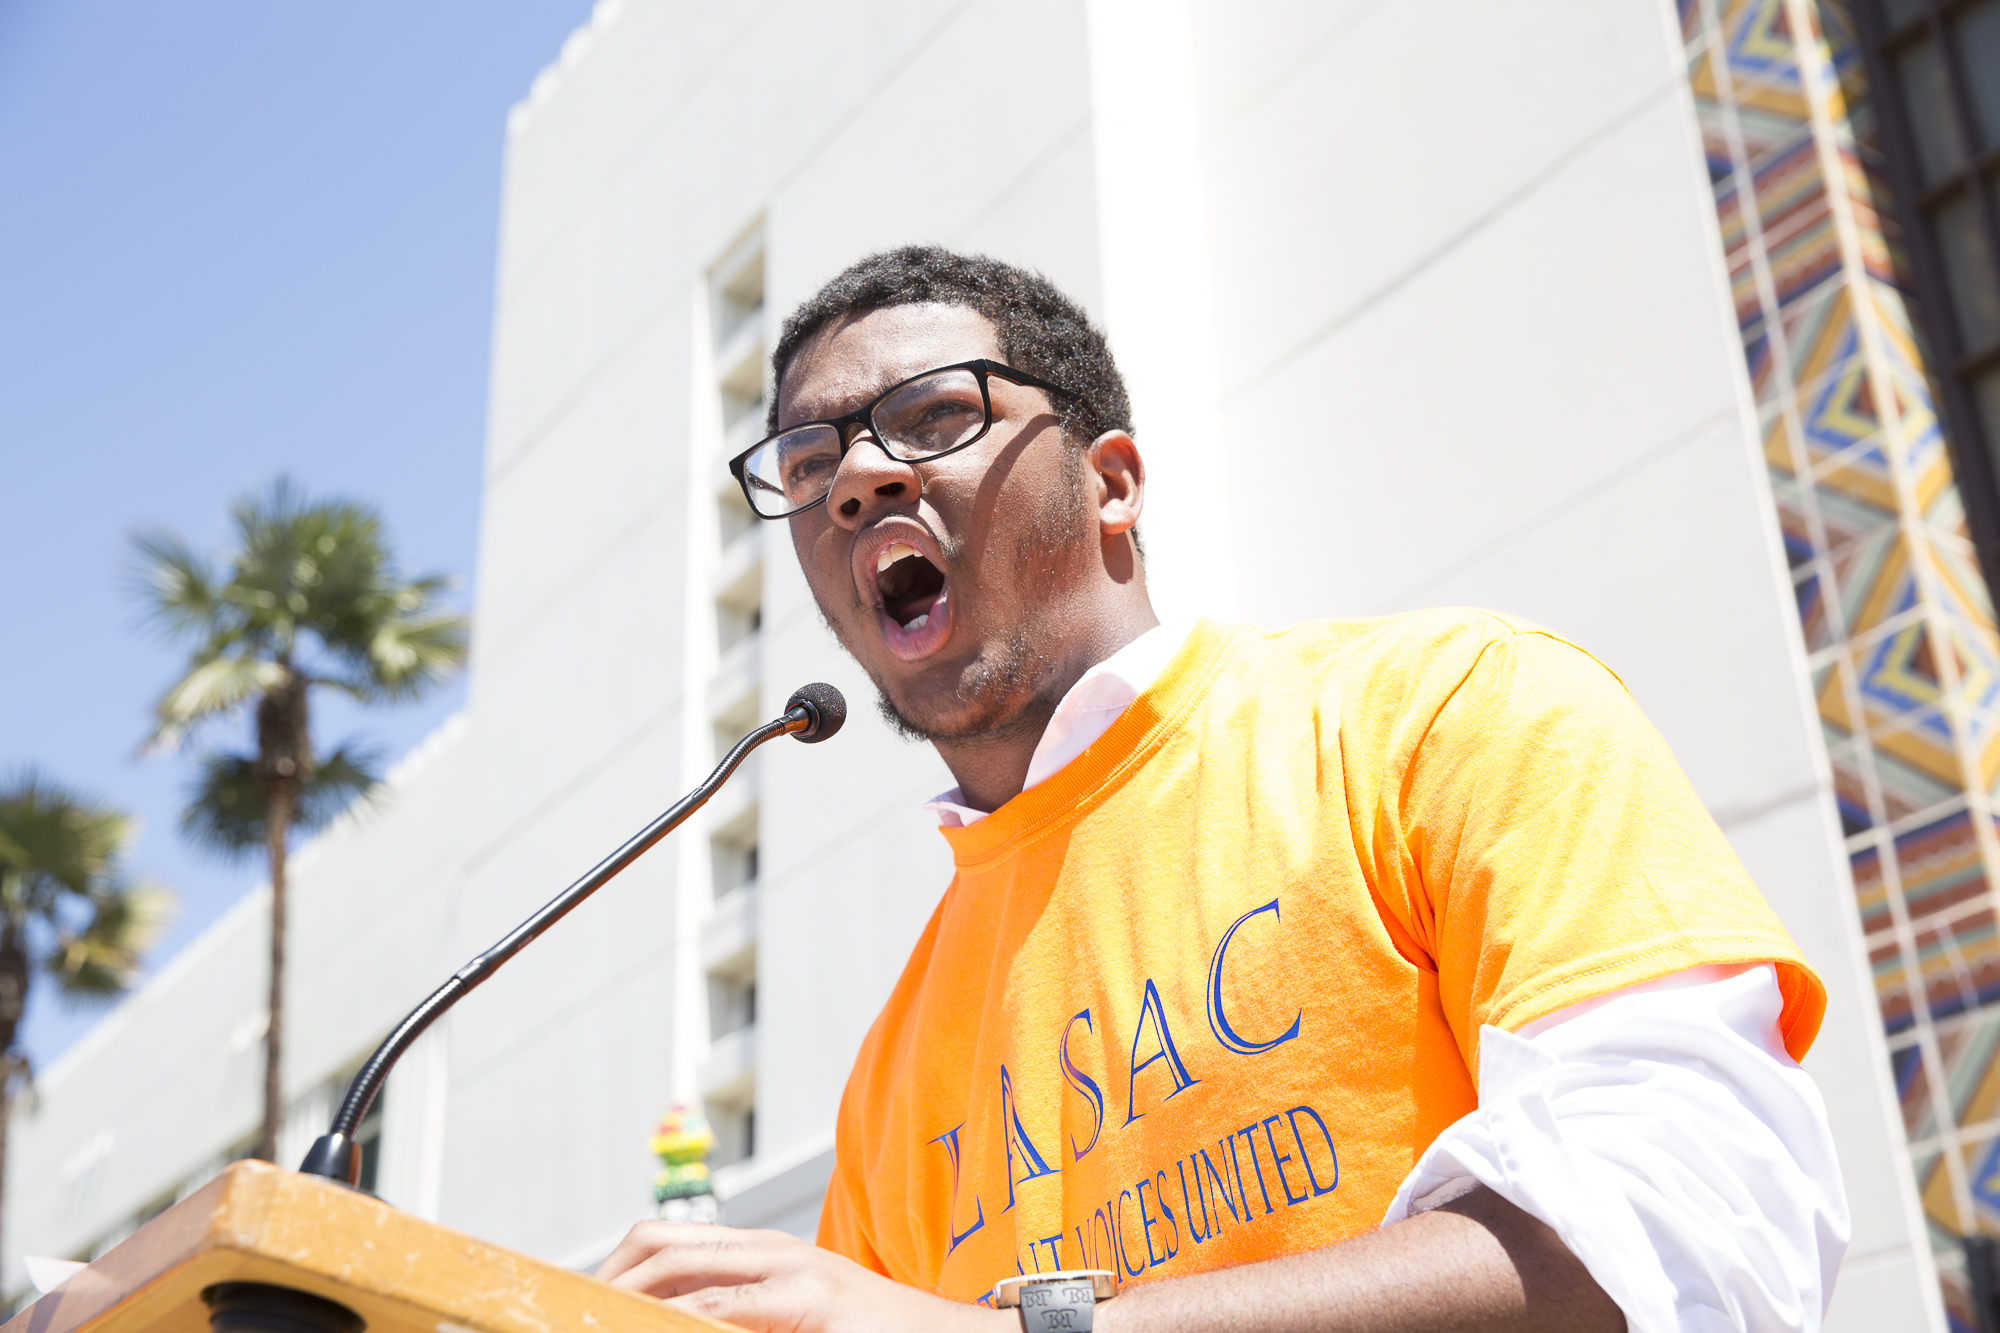  Cameron Roger, a senior at University High school, speaks at Santa Monica City Hall to hundreds of students who have “walked out” of school to protest all forms of gun violence in Santa Monica California on Friday, April 20 2018. Rogers walked nearl